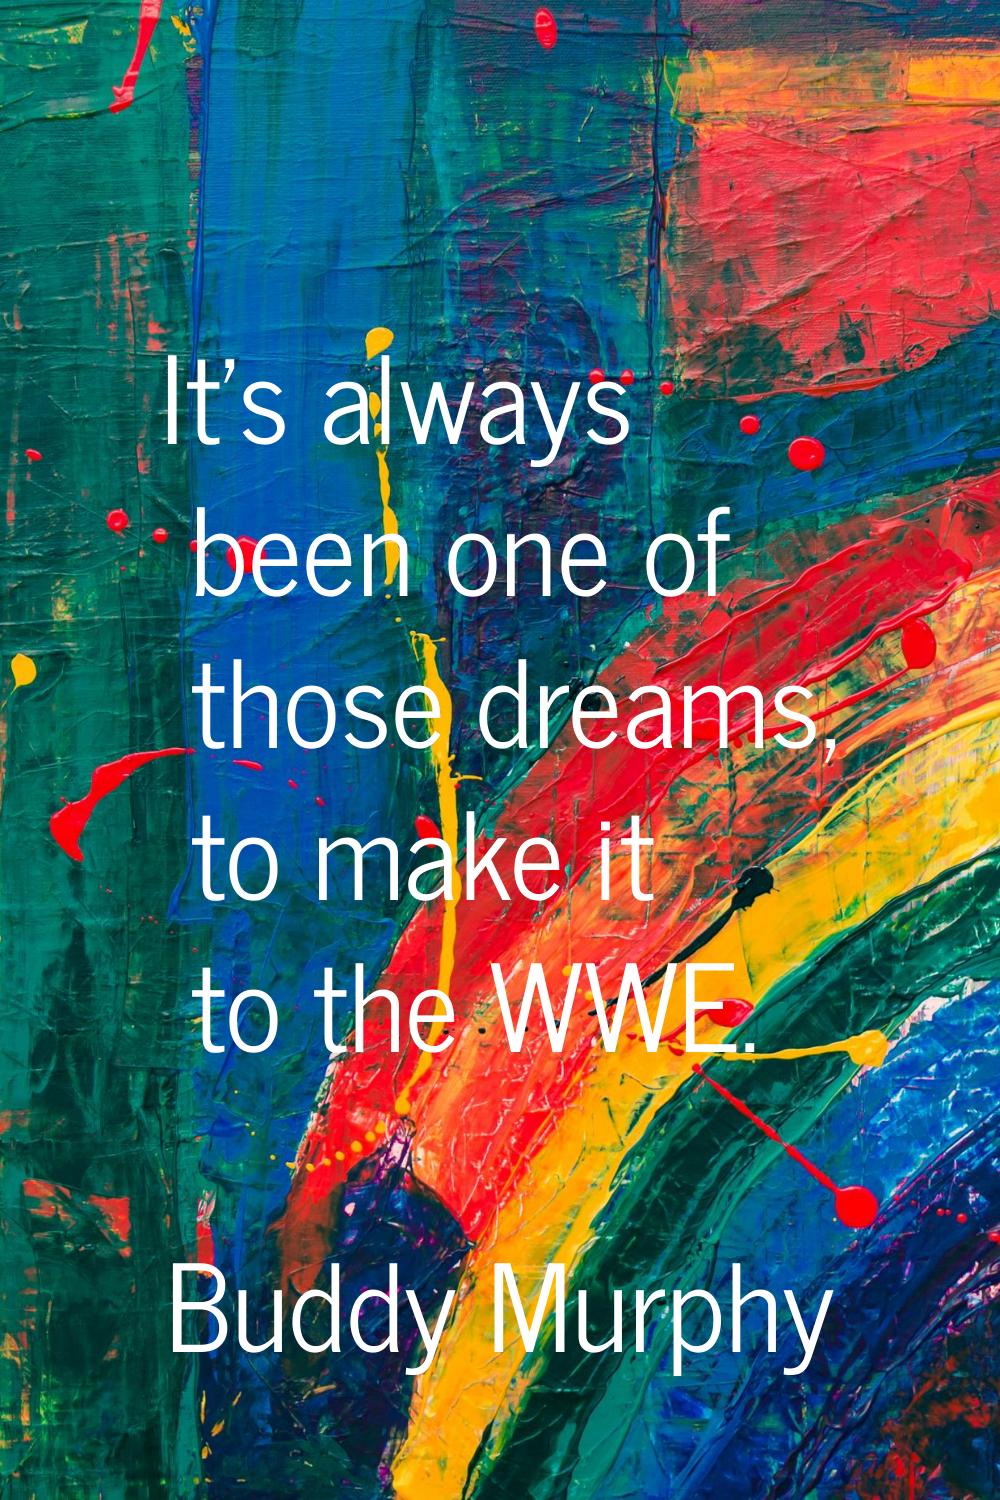 It's always been one of those dreams, to make it to the WWE.